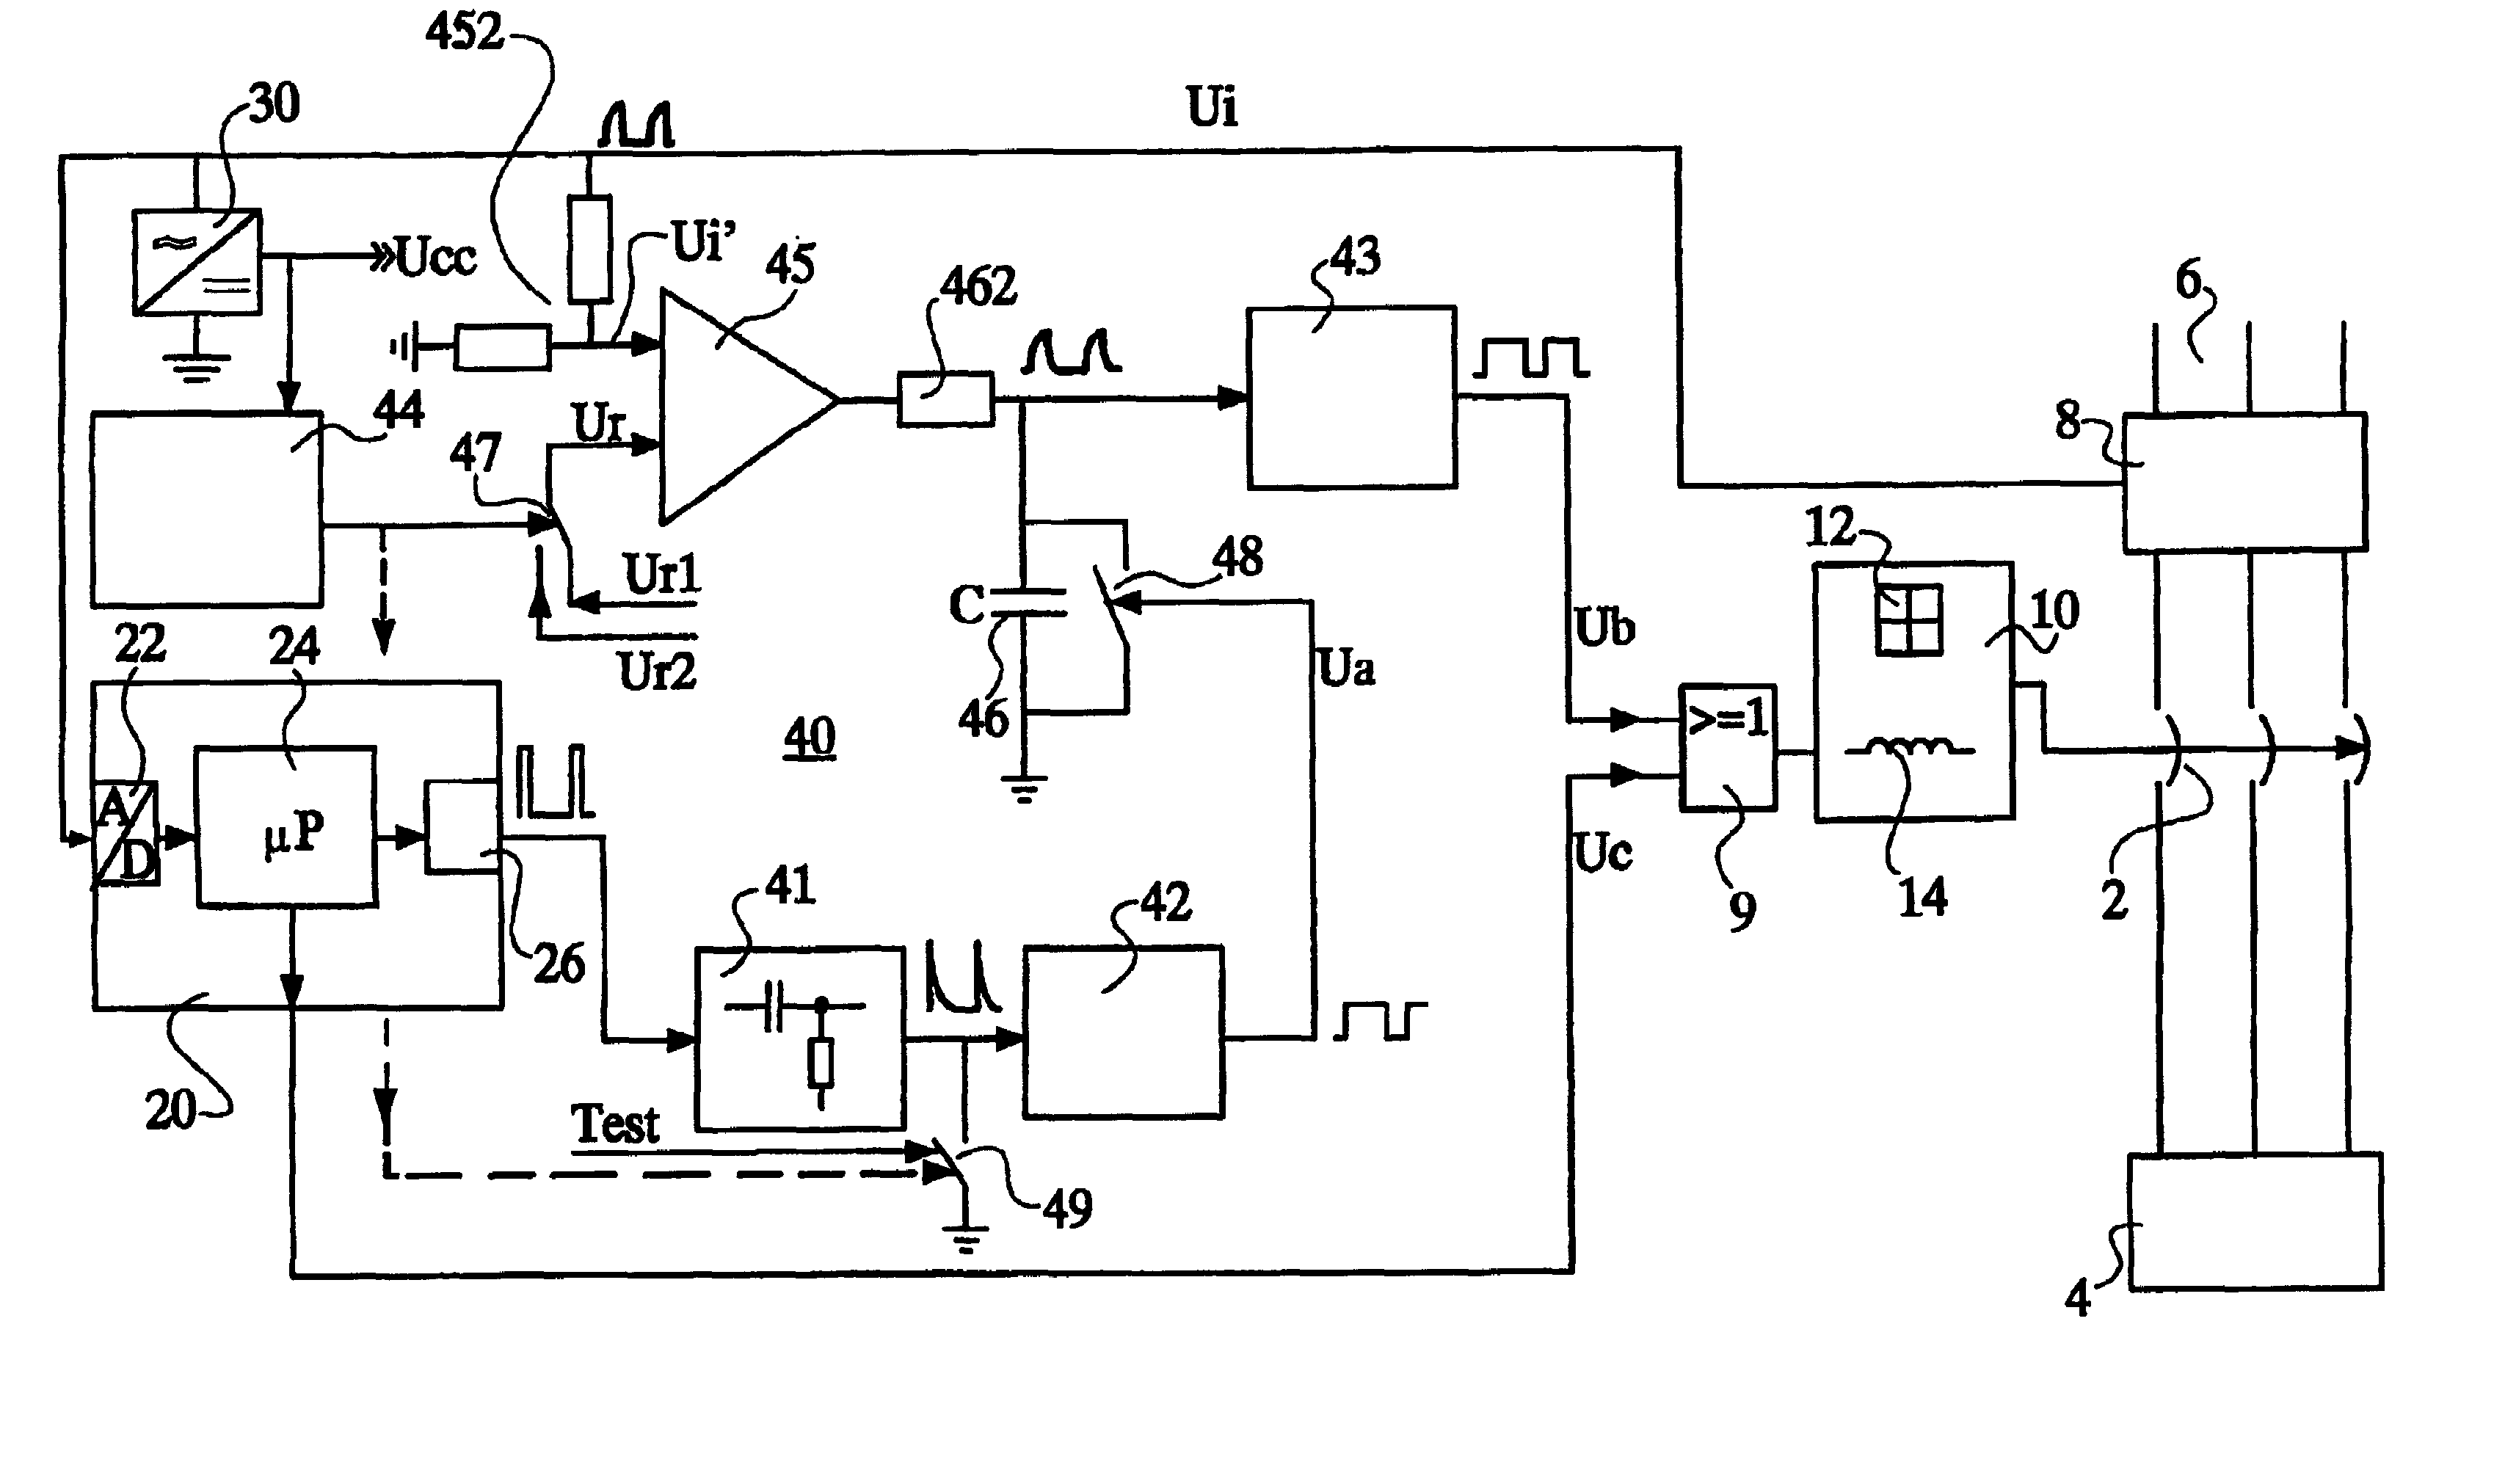 Circuit breaker having a microprocessor-controlled tripping device and a bypass circuit